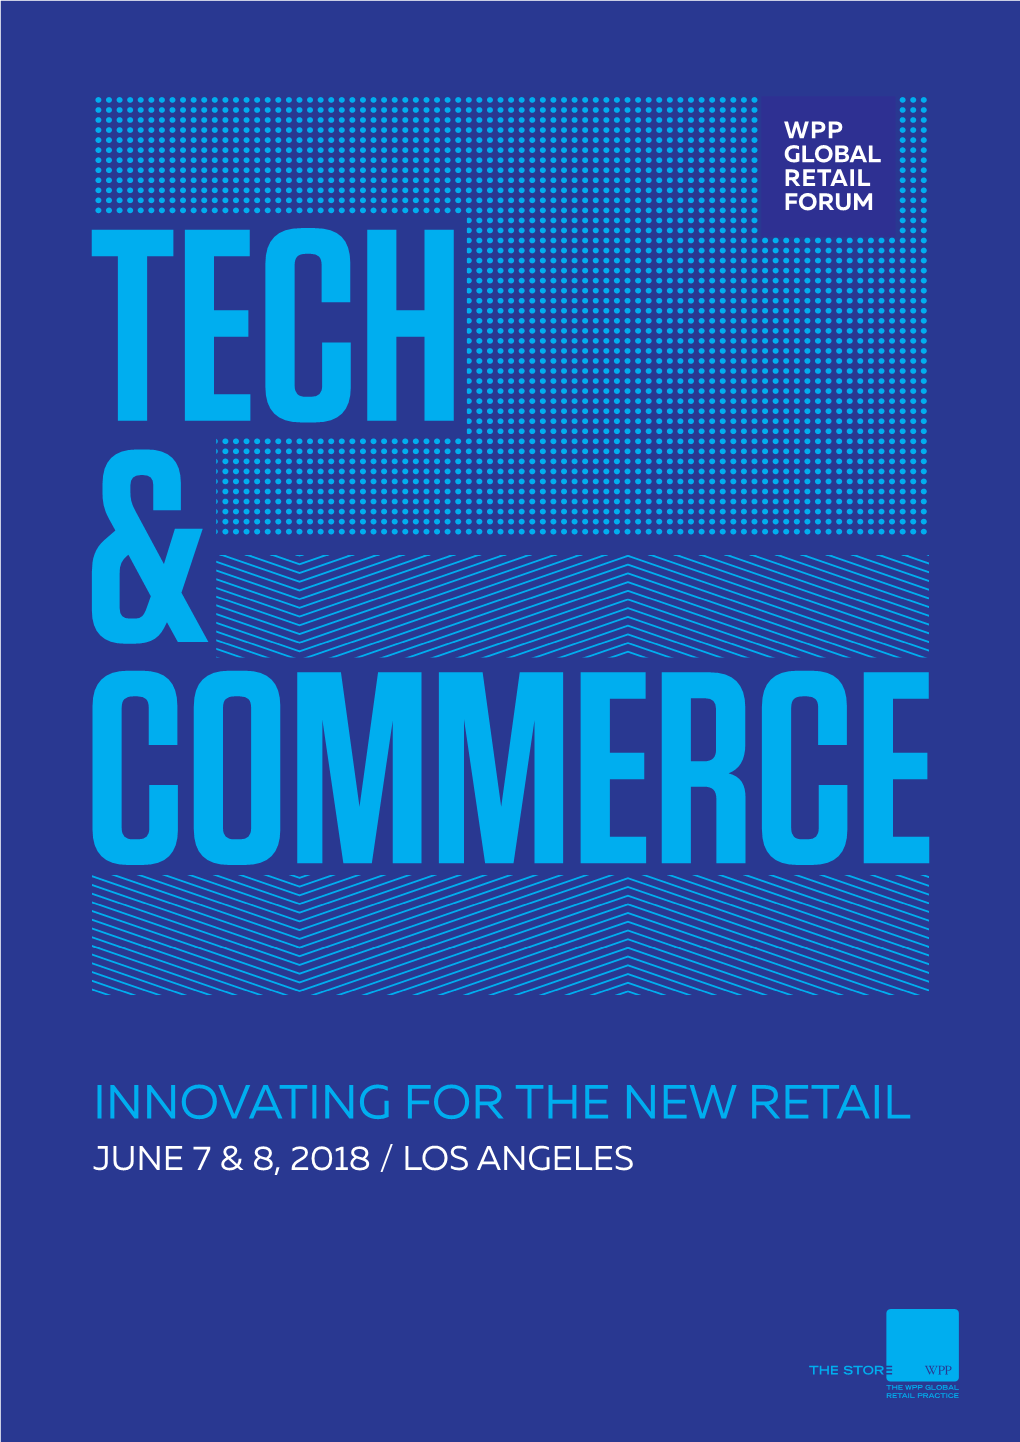 INNOVATING for the NEW RETAIL JUNE 7 & 8, 2018 / LOS ANGELES Thank You to Our Sponsors! Platinum Sponsors